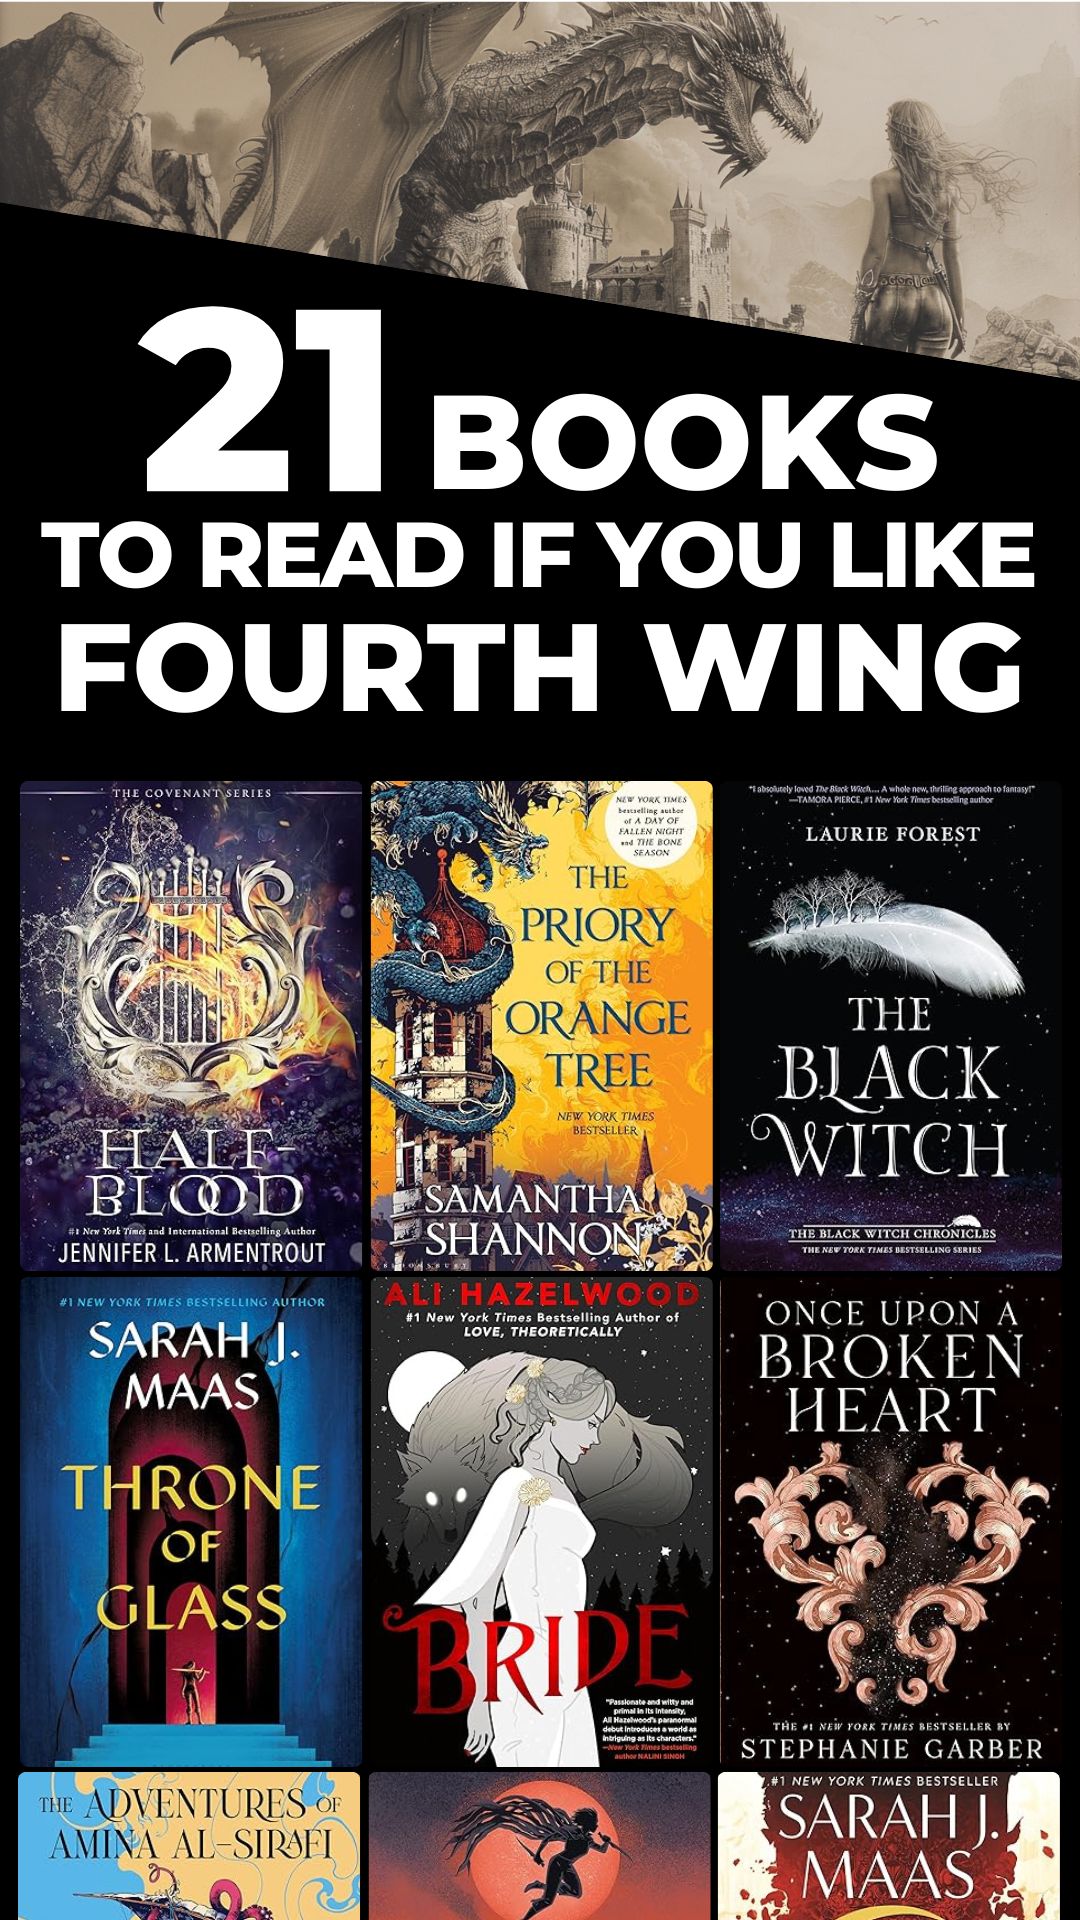 Books Recommendations if you like 'Fourth Wing